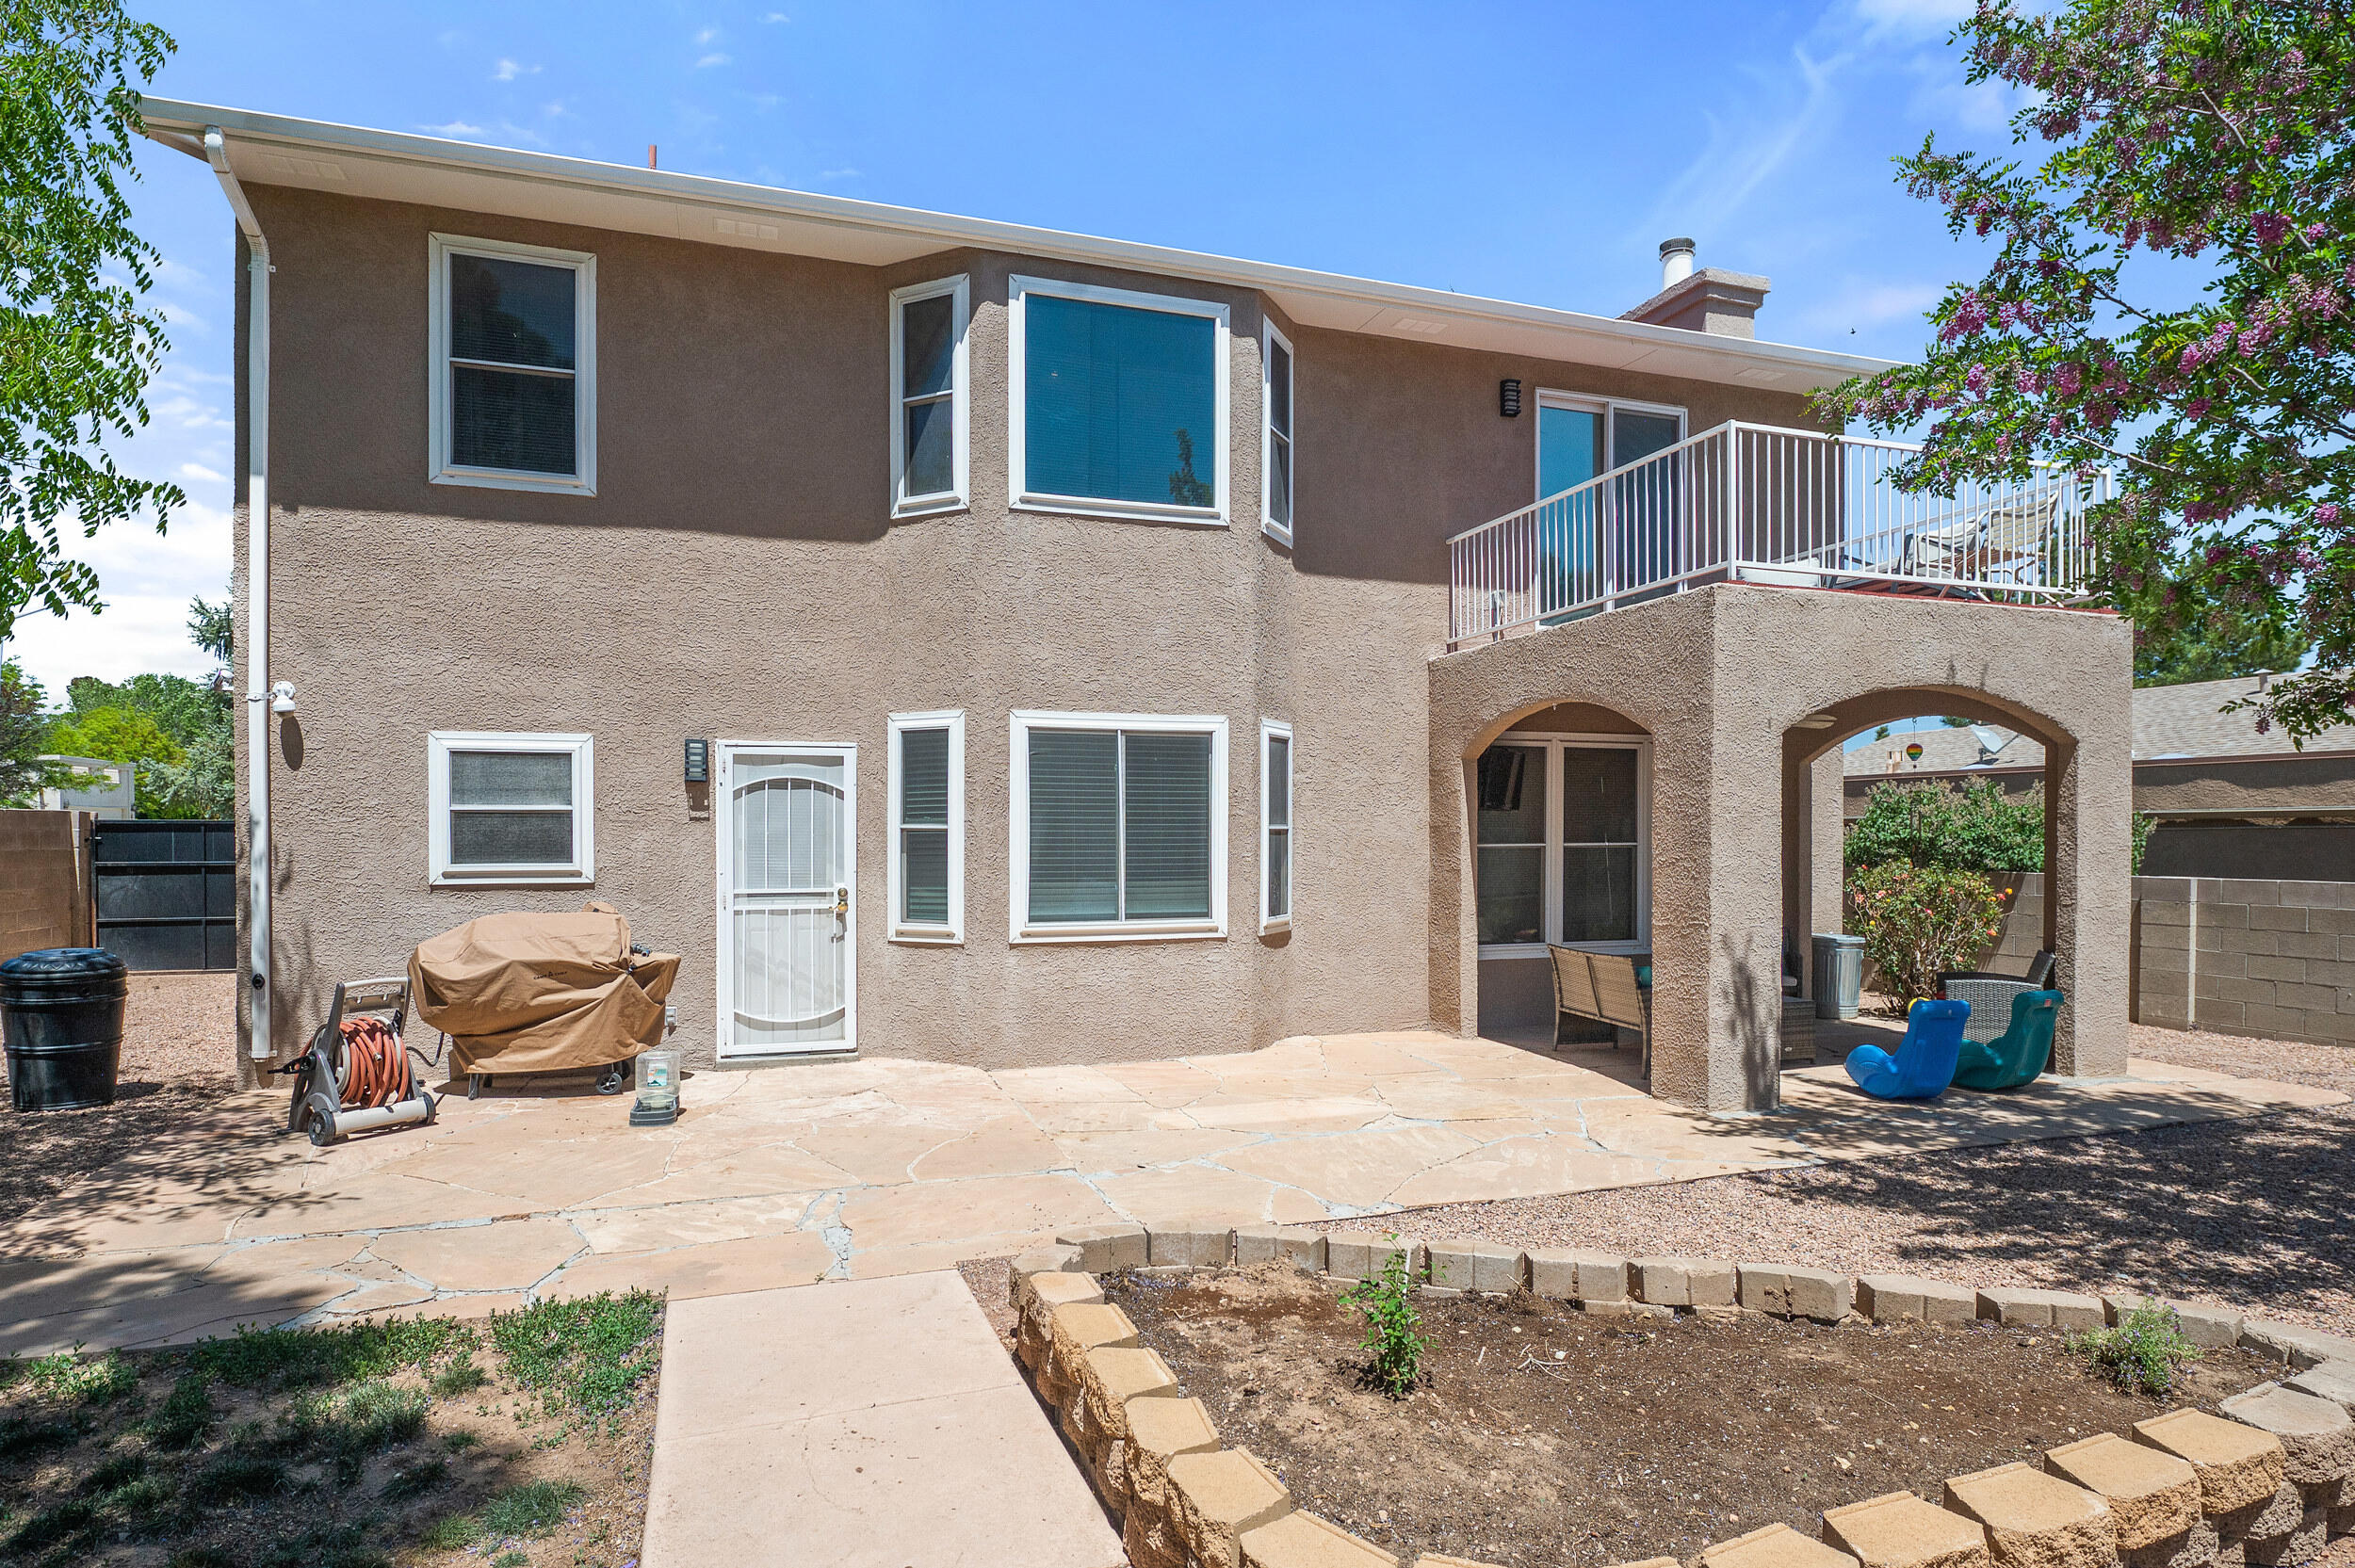 4540 Habershaw Road NW, Albuquerque, New Mexico 87120, 3 Bedrooms Bedrooms, ,3 BathroomsBathrooms,Residential,For Sale,4540 Habershaw Road NW,1061979